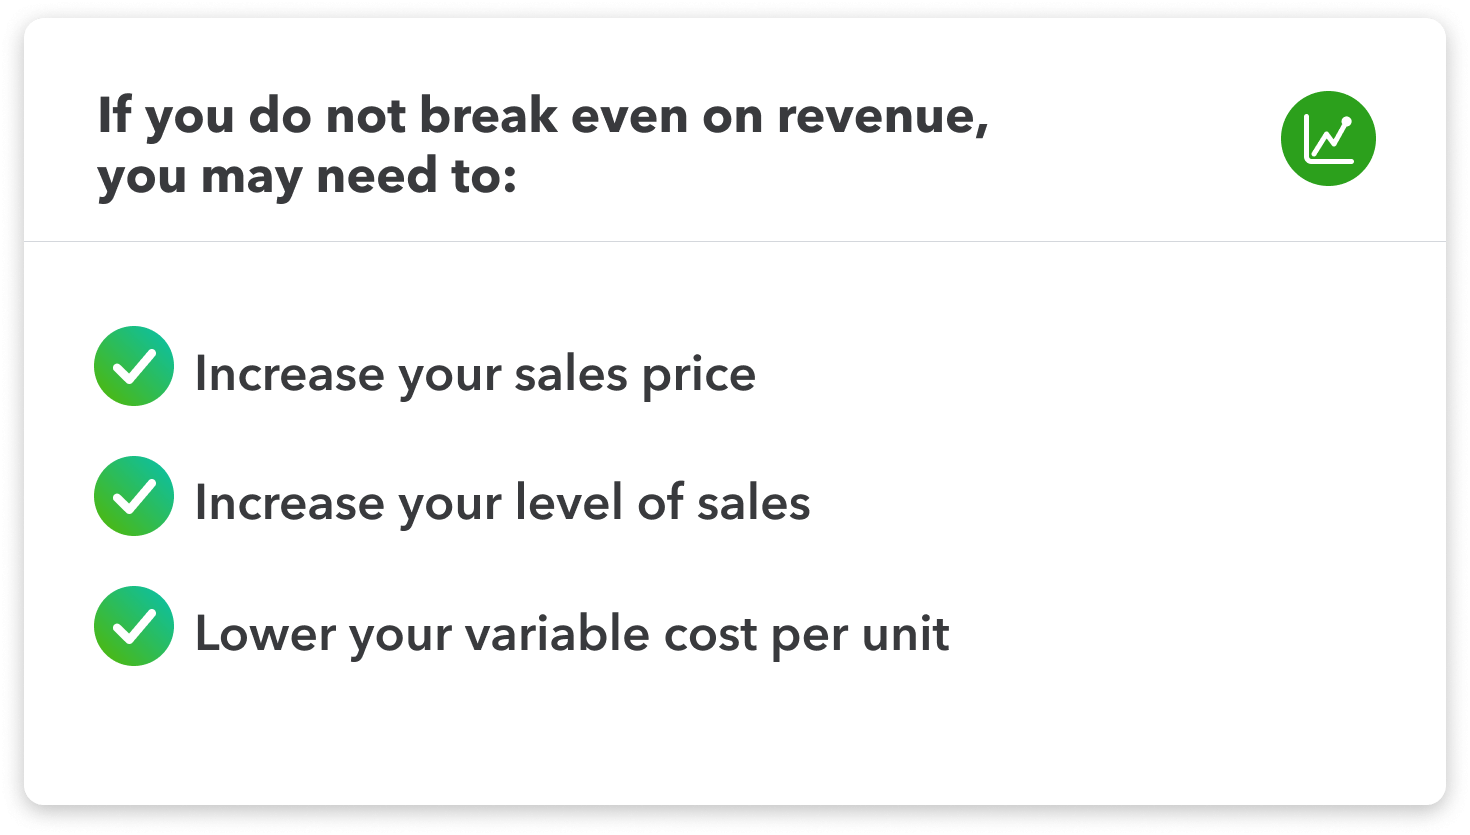 illustration of graph, with the text “If you do not break even on revenue, you may need to: increase your sales price, increase your level of sales, lower your variable cost per unit”